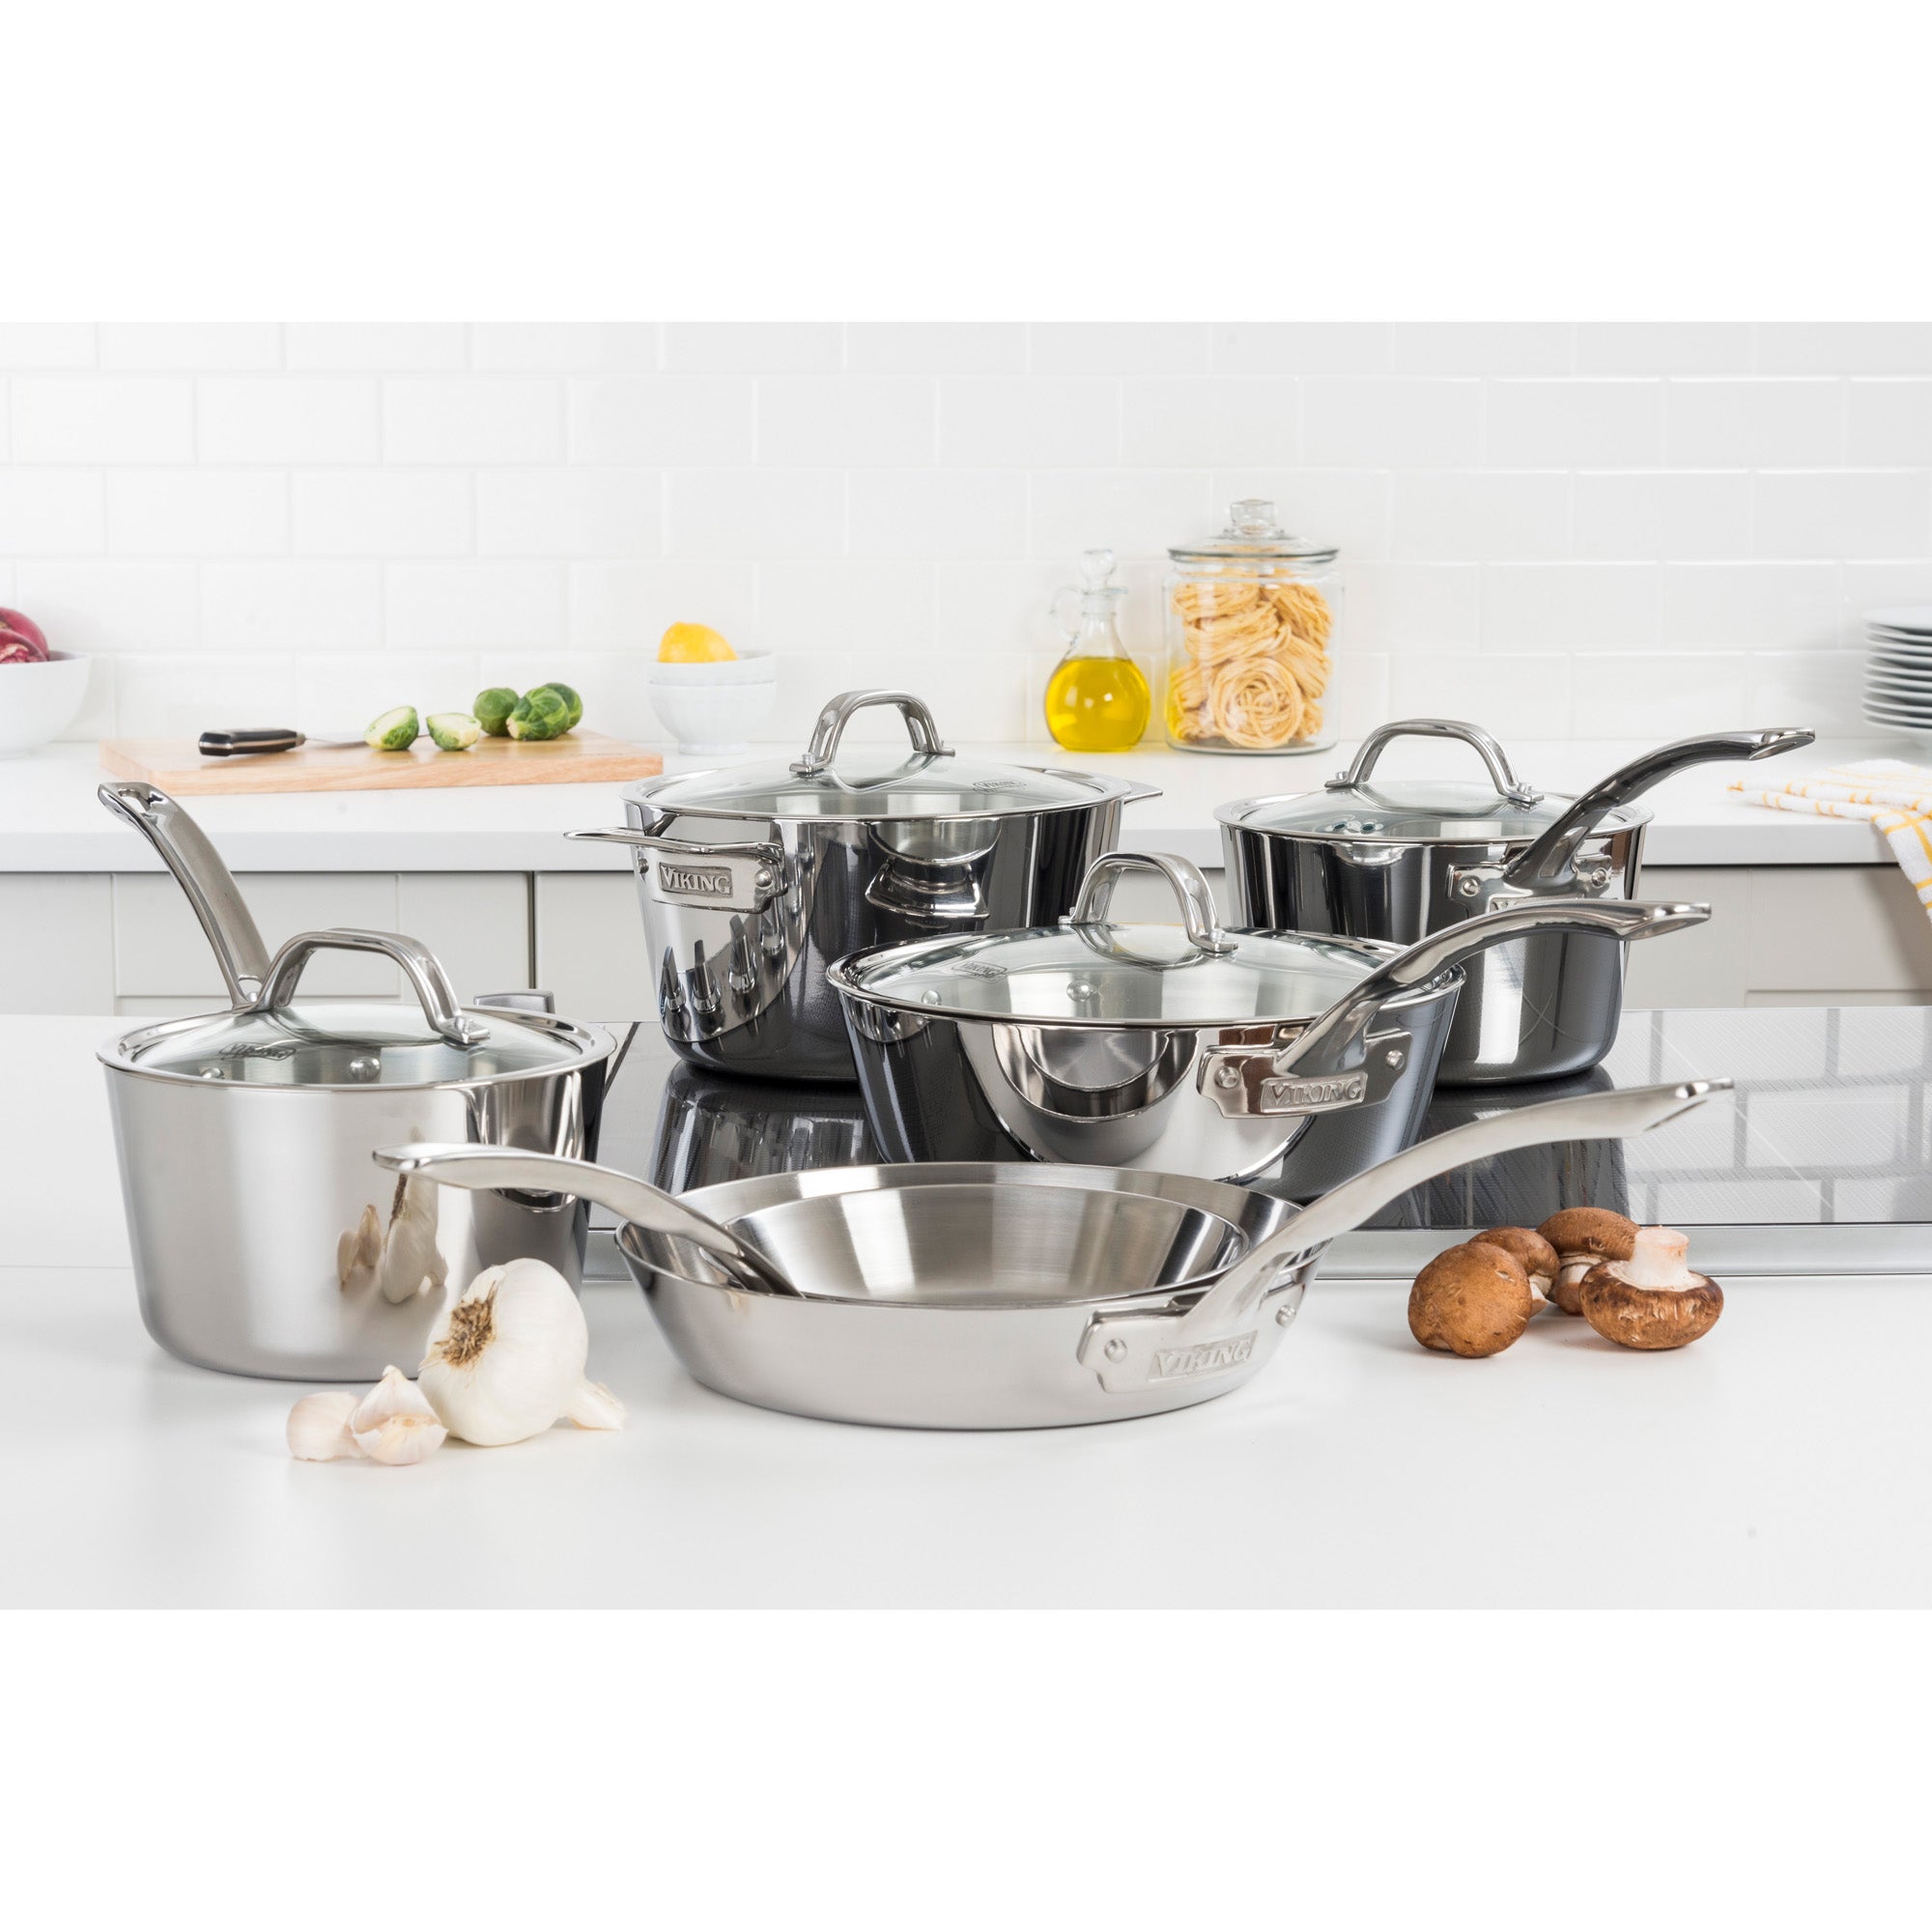 Viking Contemporary 3-Ply Stainless Steel 10-Piece Cookware Set with Glass Lids